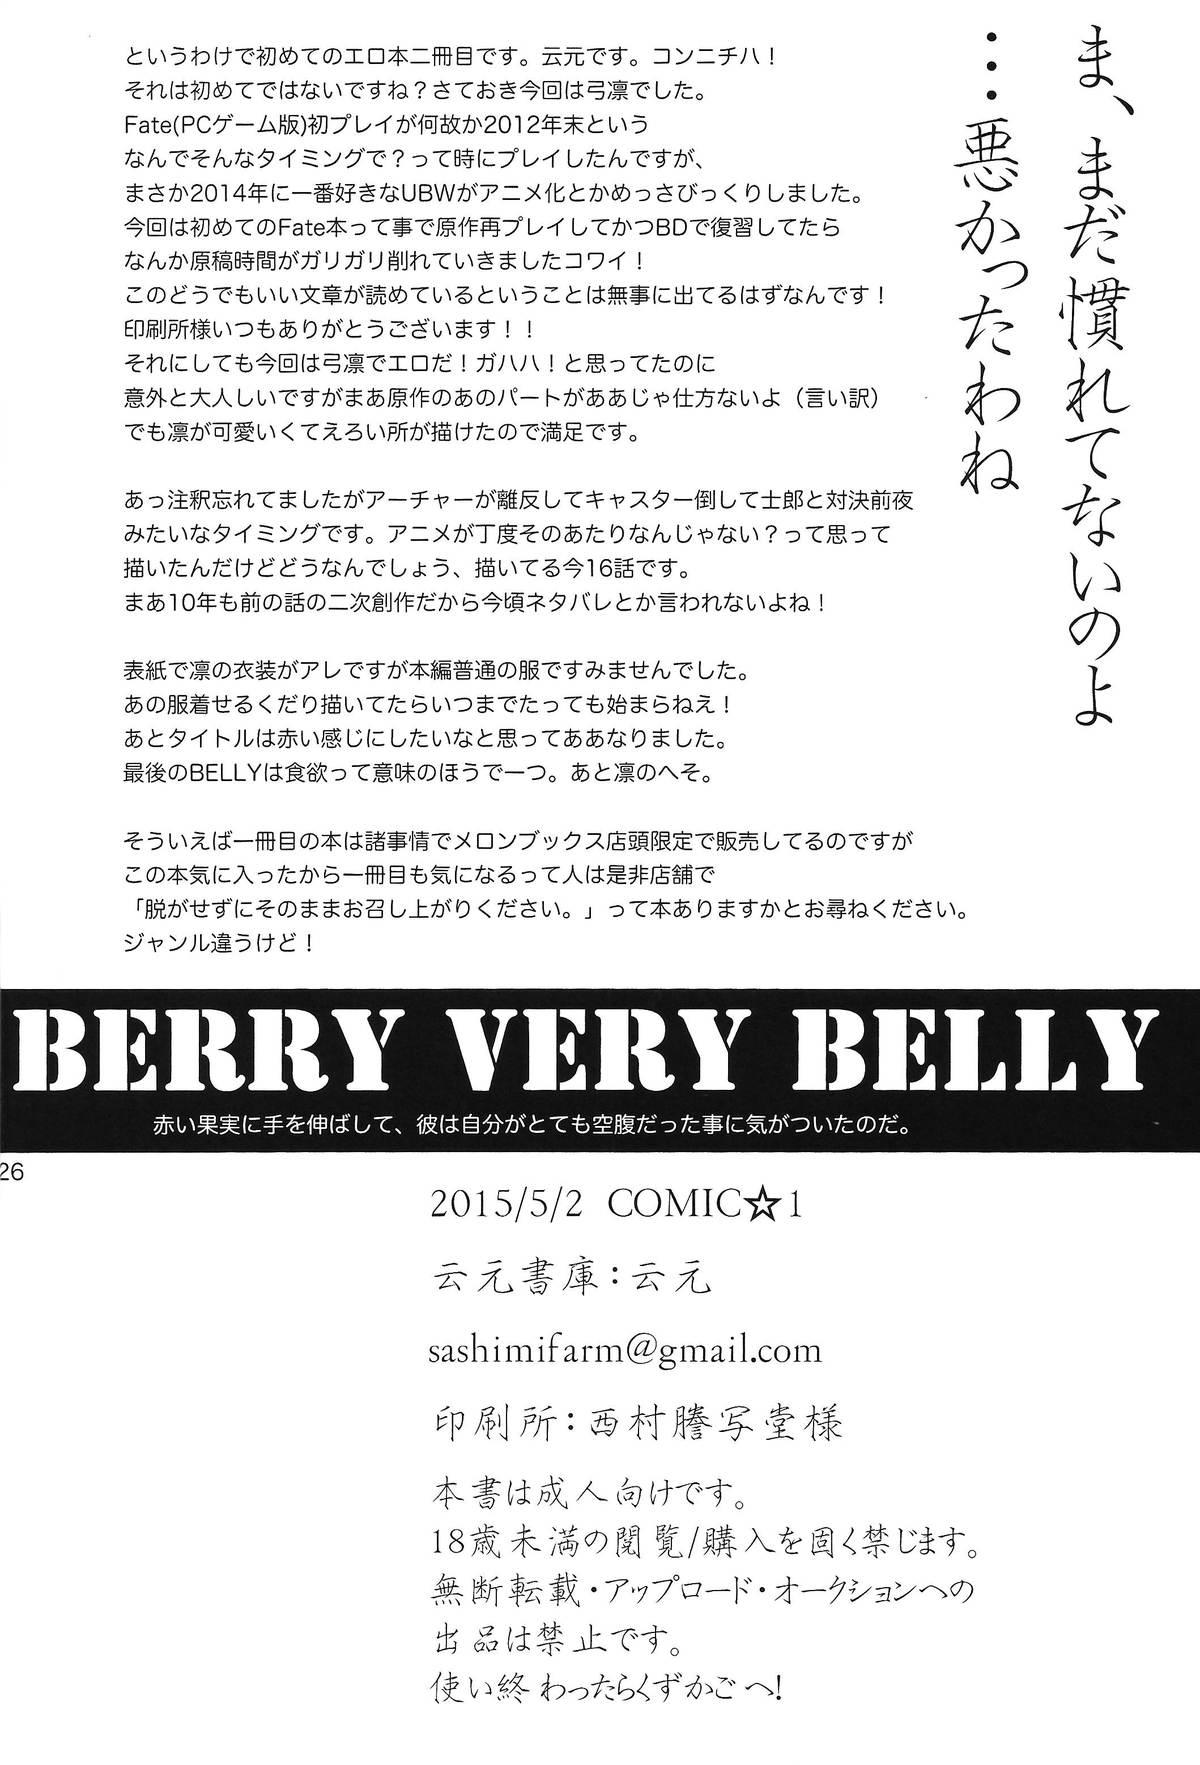 Petite Porn BERRY VERY BELLY - Fate stay night Gay Friend - Page 24